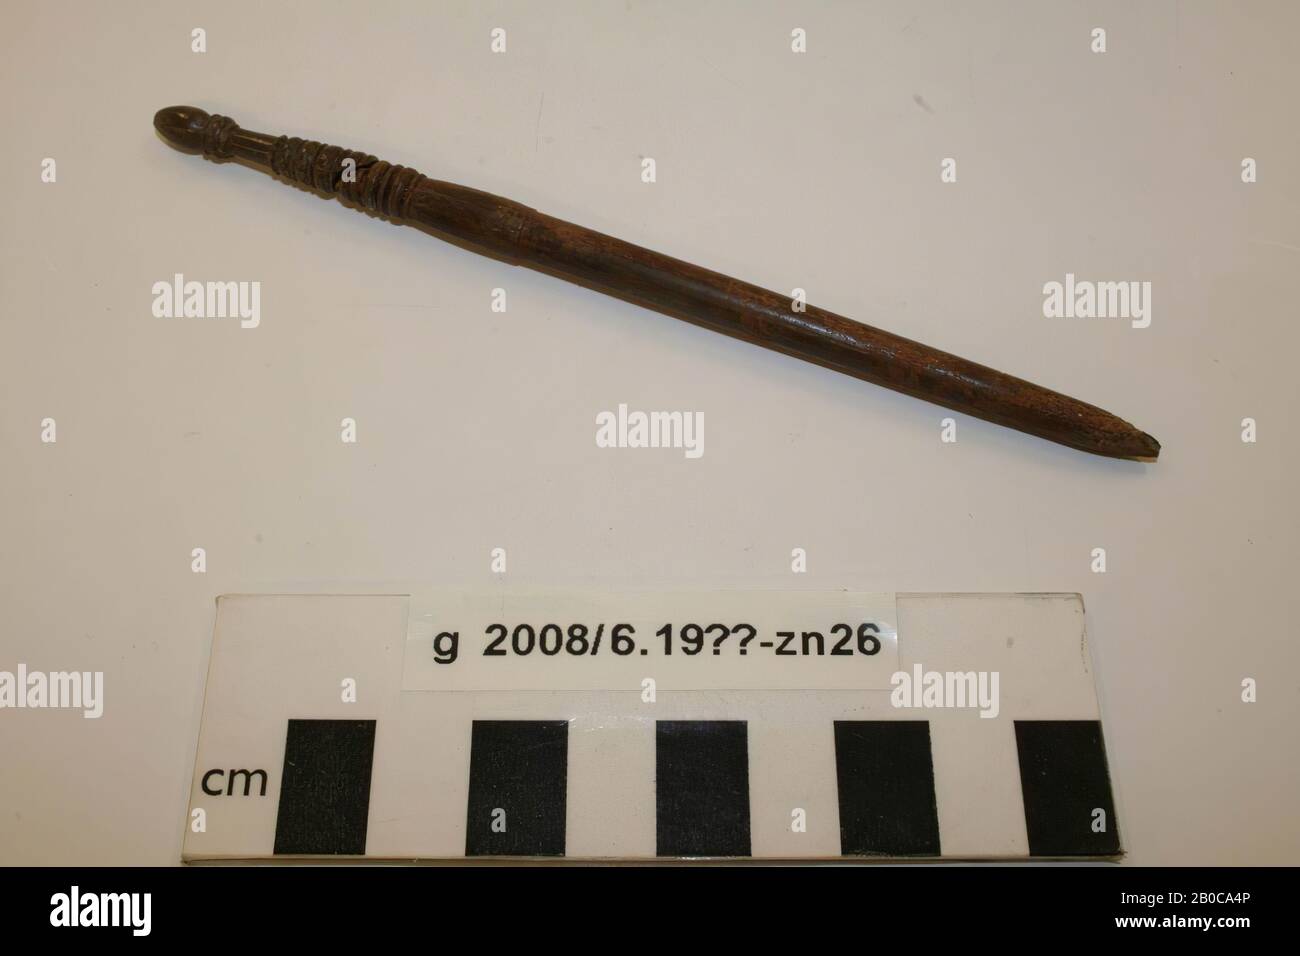 Roman Stylus High Resolution Stock Photography and Images - Alamy